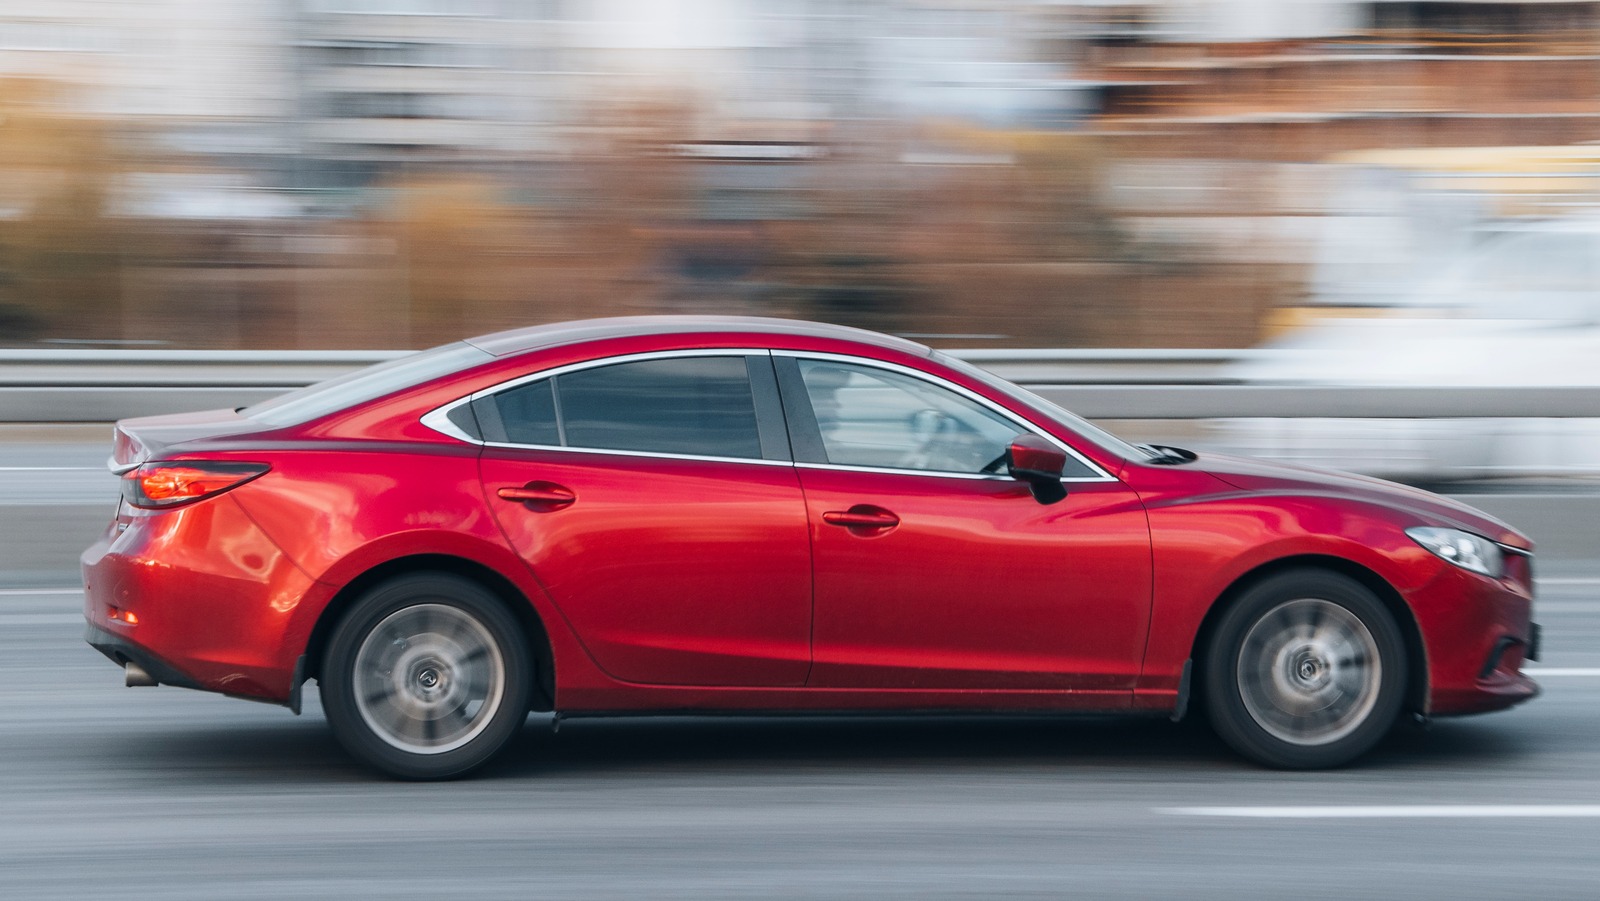 The Unfortunate Mazda 6 Design That Attracted Spiders